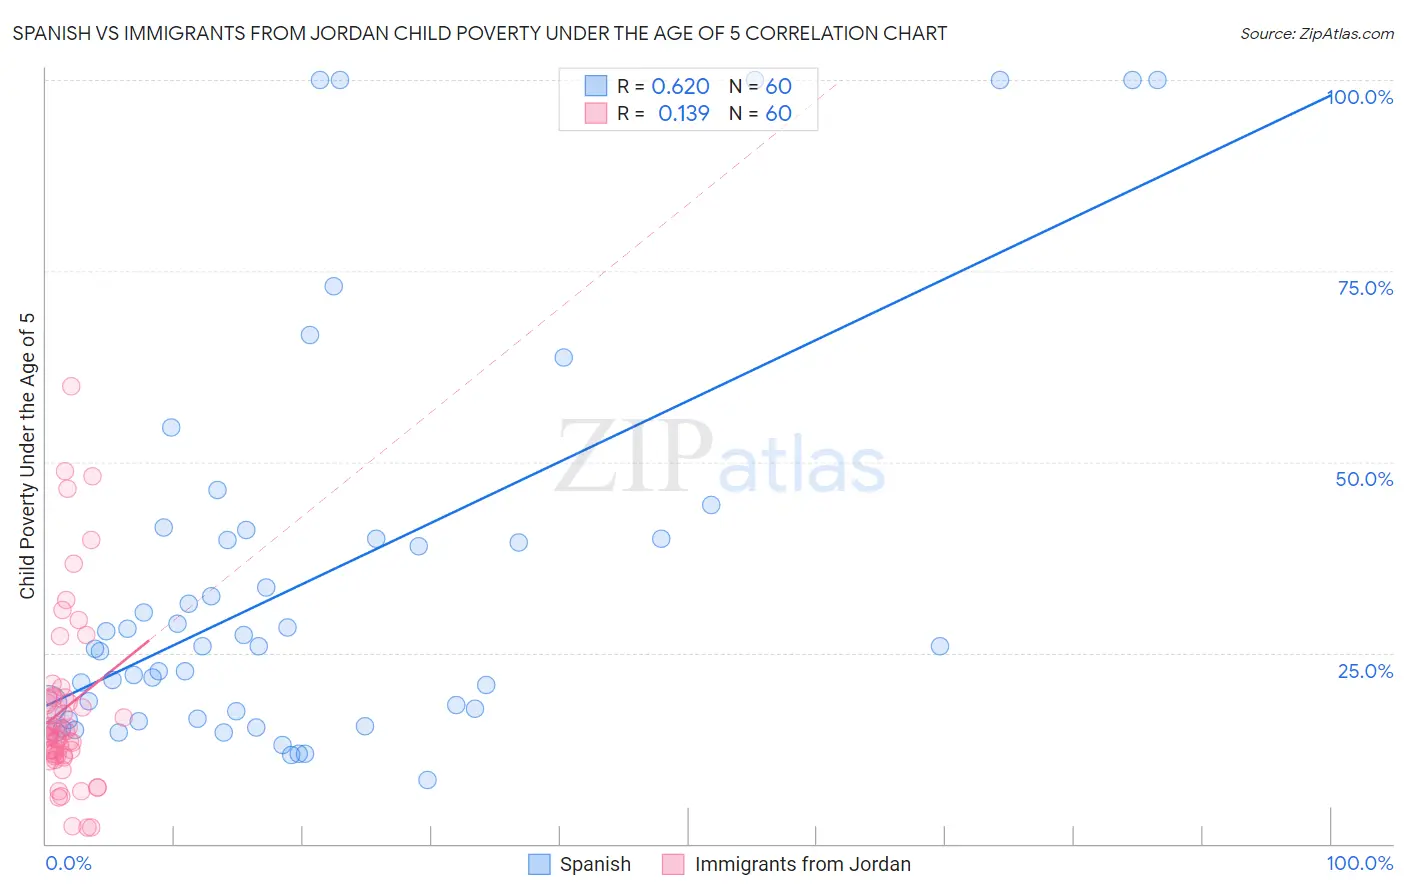 Spanish vs Immigrants from Jordan Child Poverty Under the Age of 5